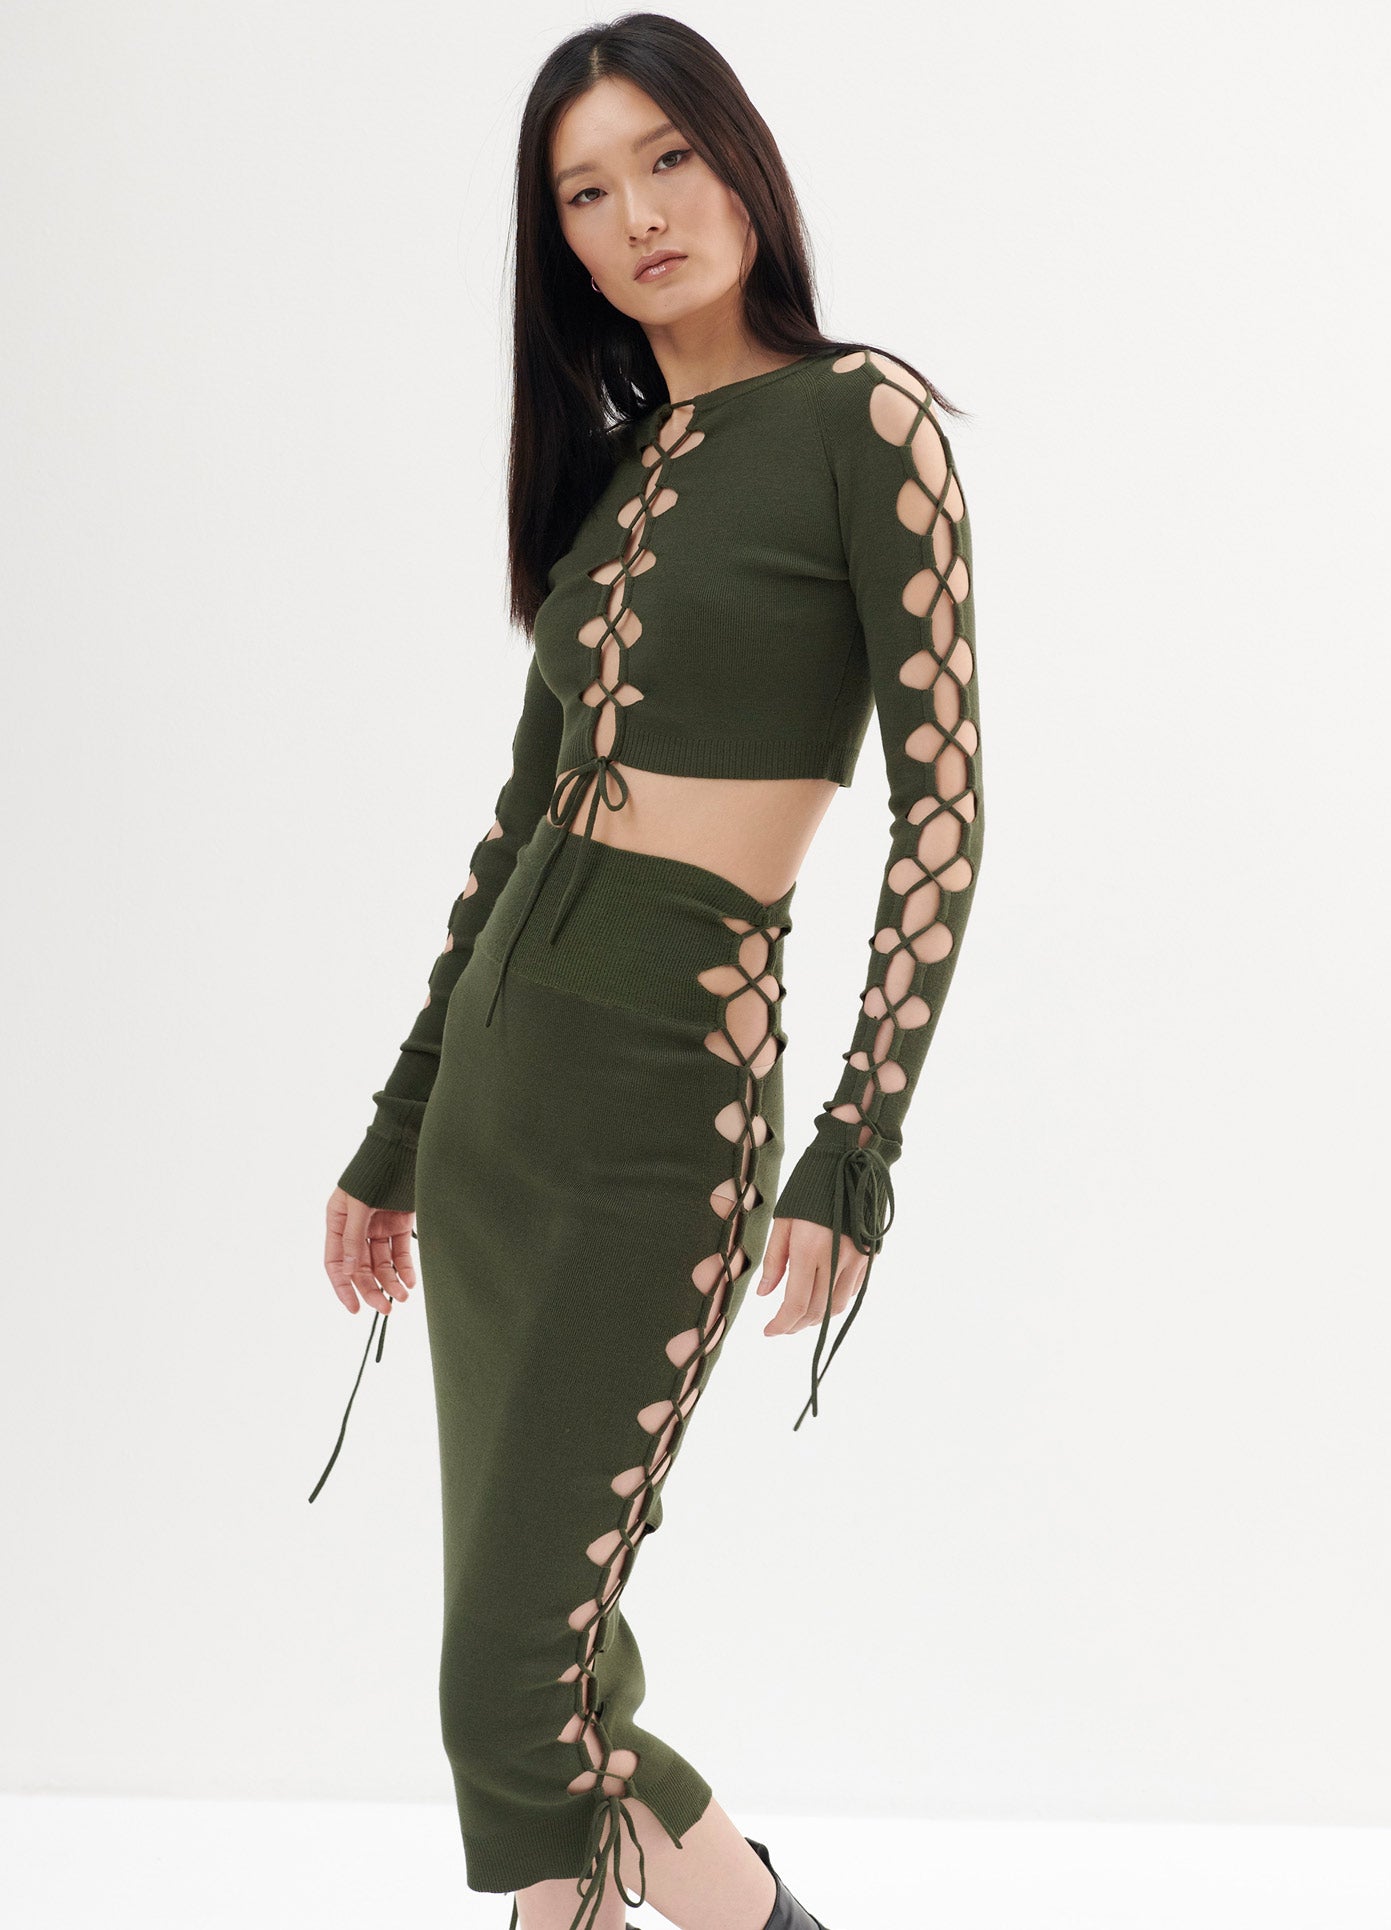 MONSE Lacing Detail Cropped Sweater in Olive on Model Side View